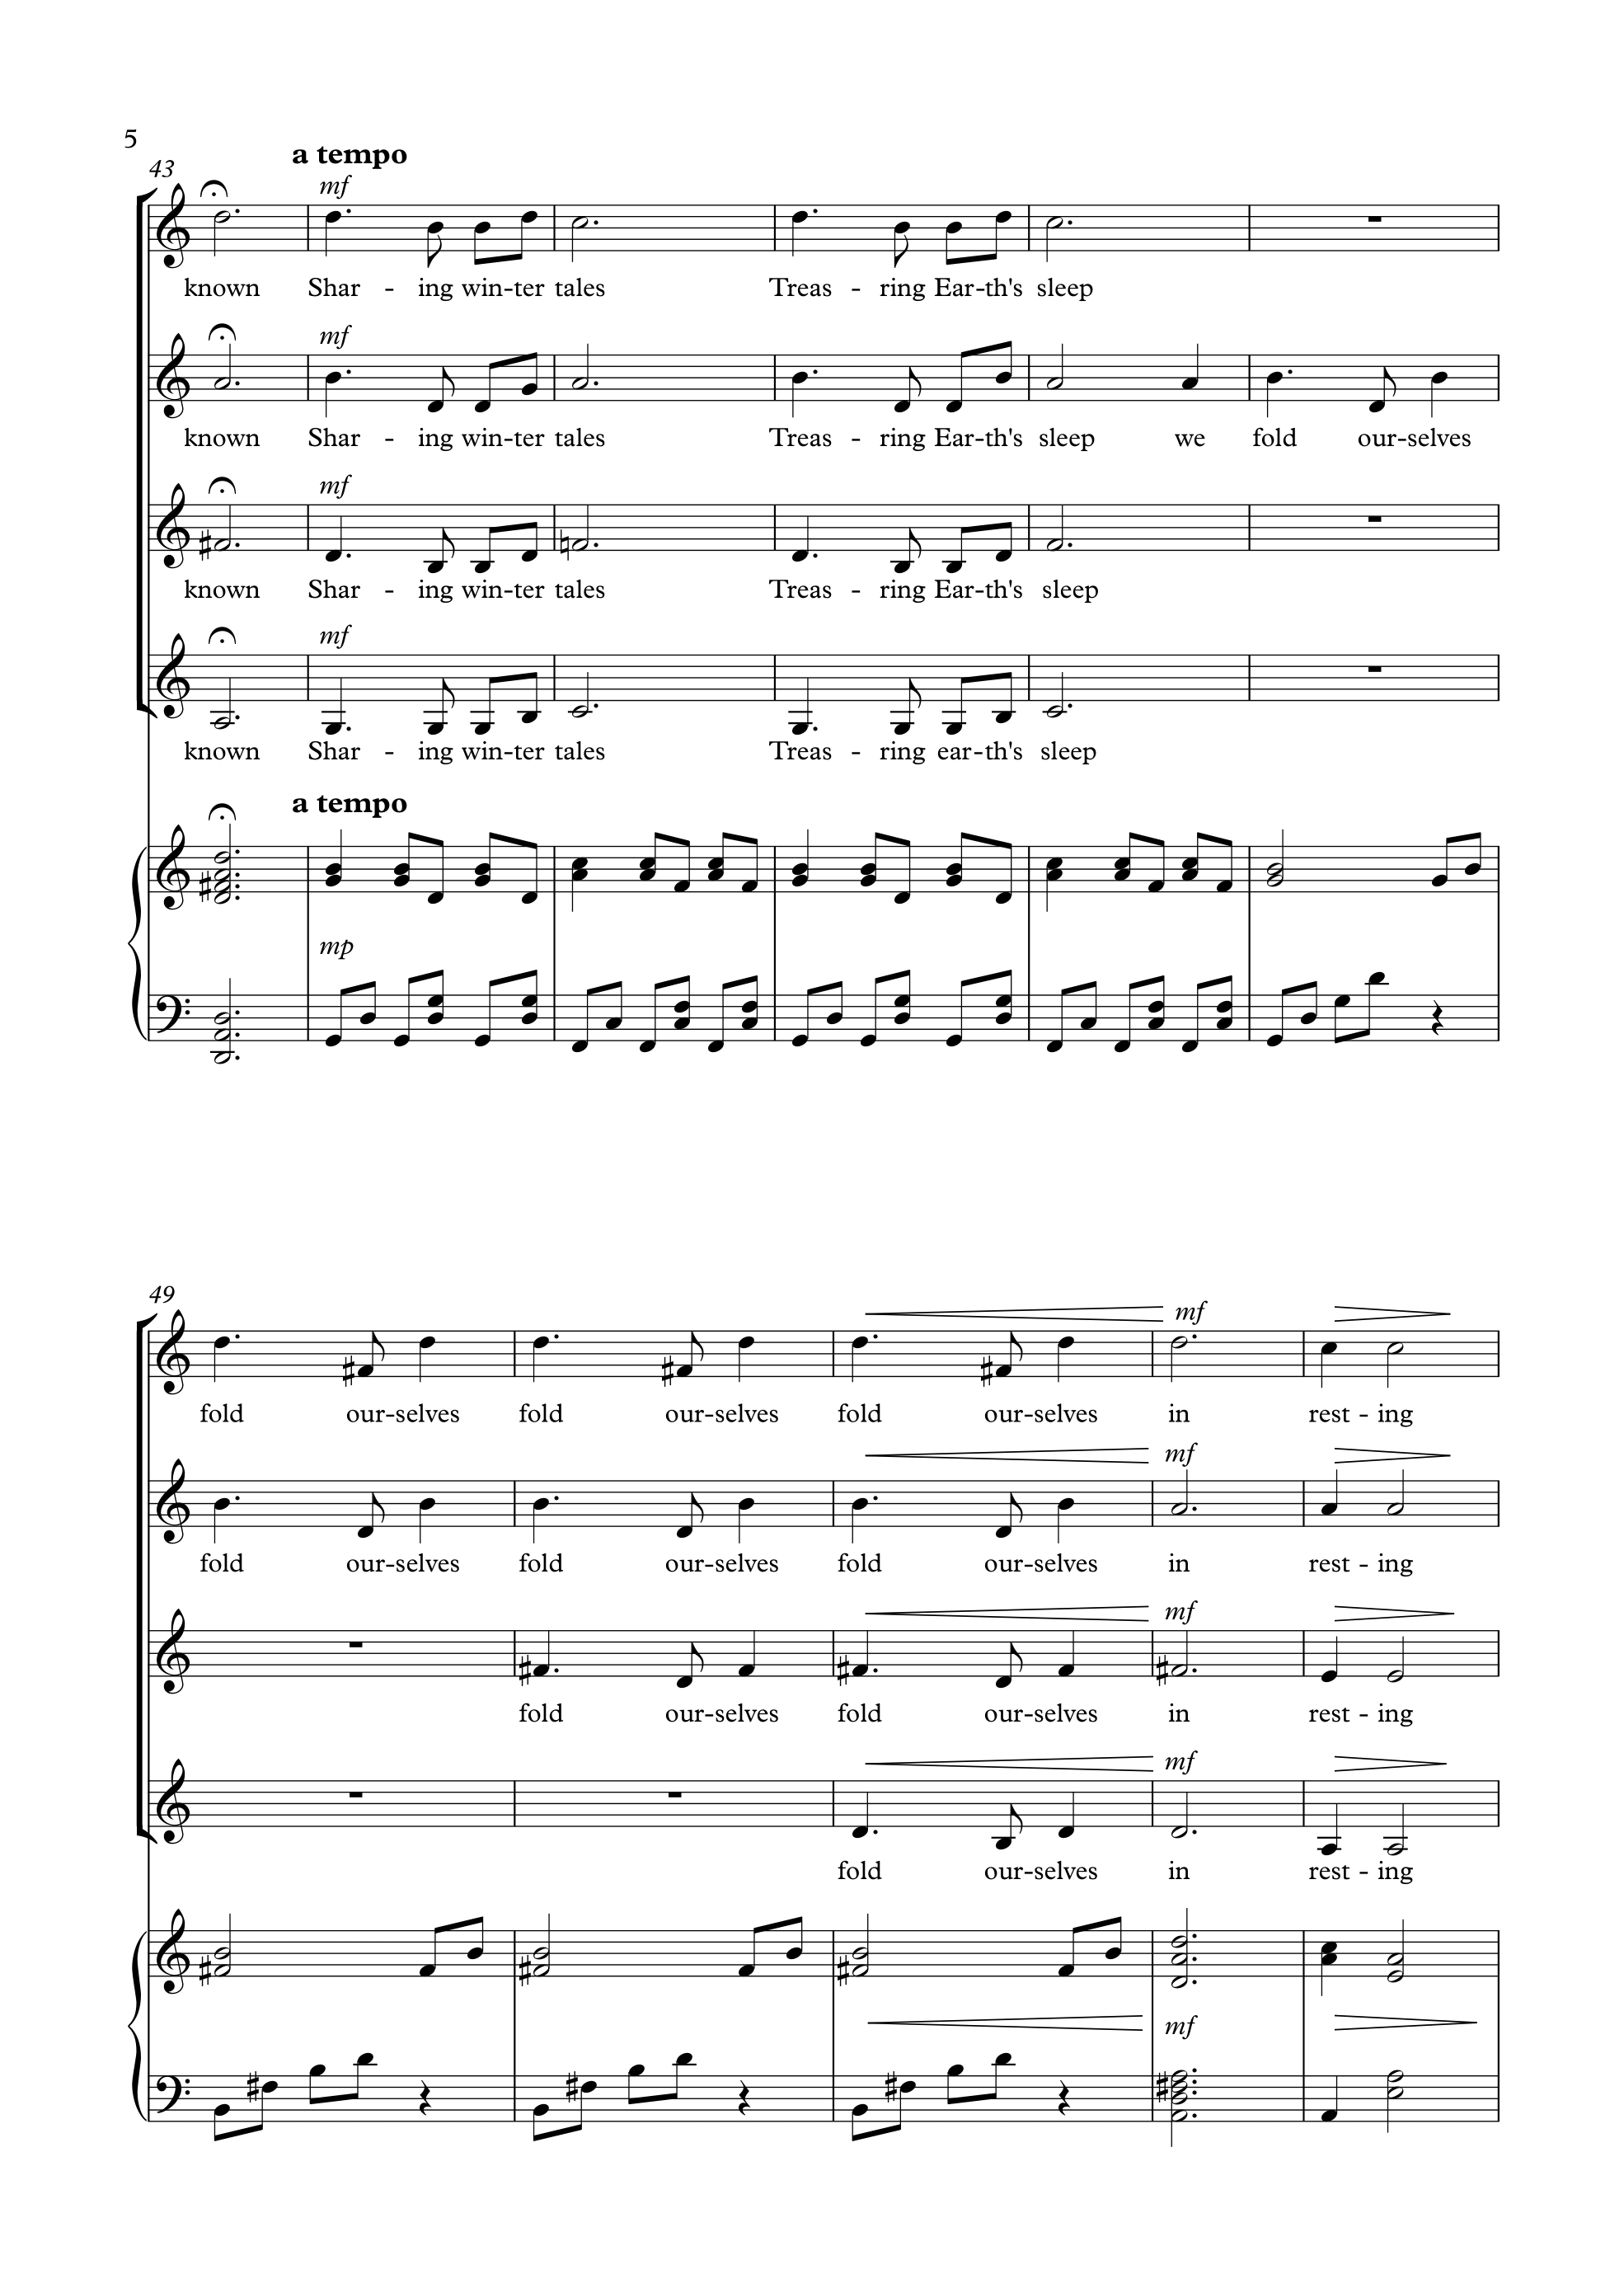 201902_A Promise of Spring Full Score-6.png